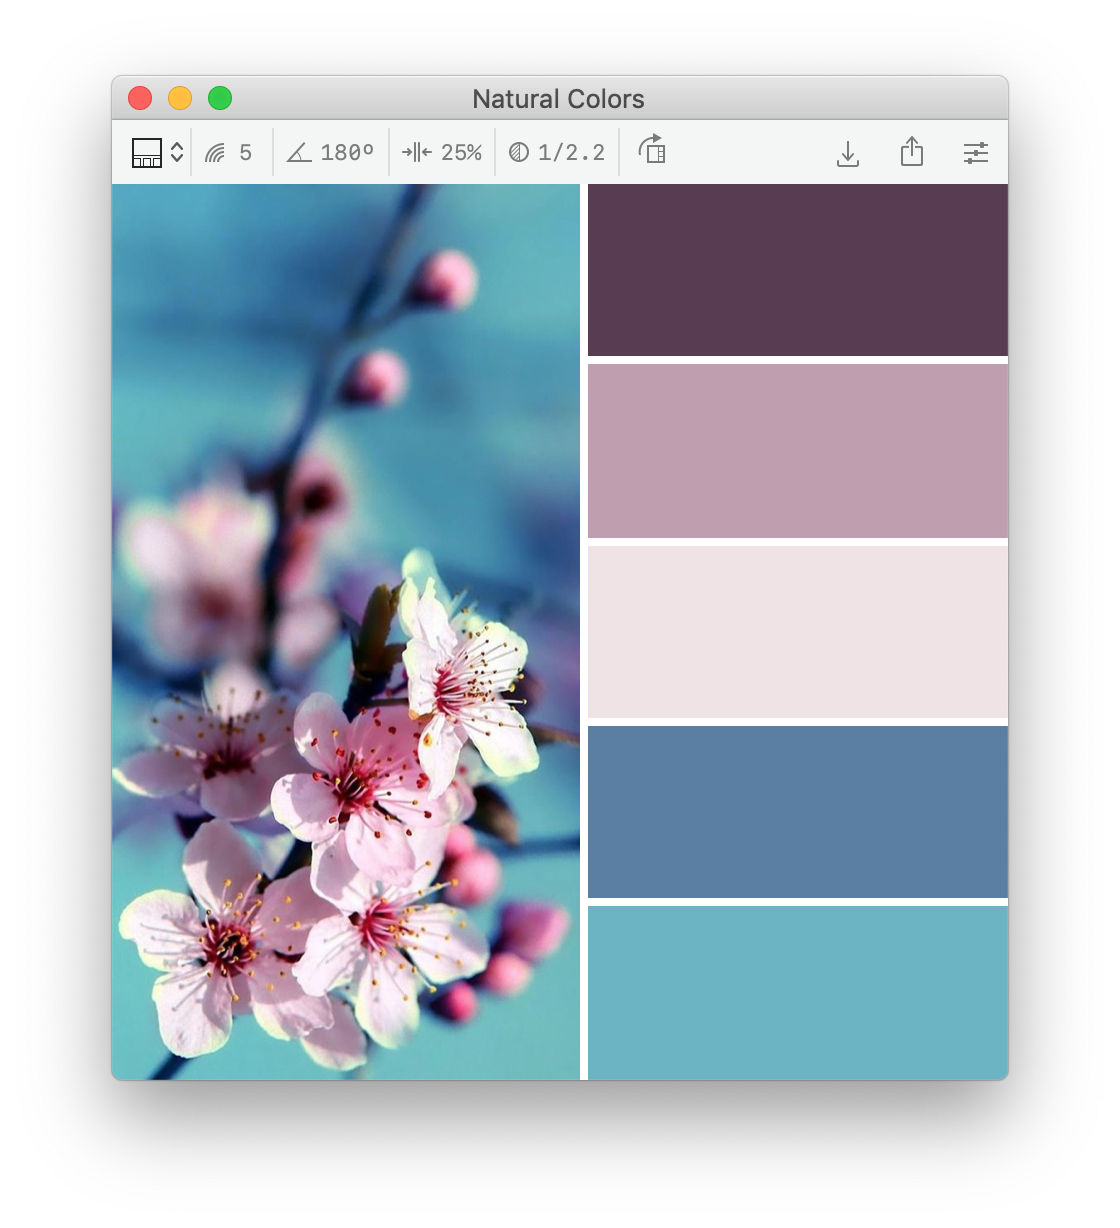 Swatch Book Editor - Make Colors Combo From Image